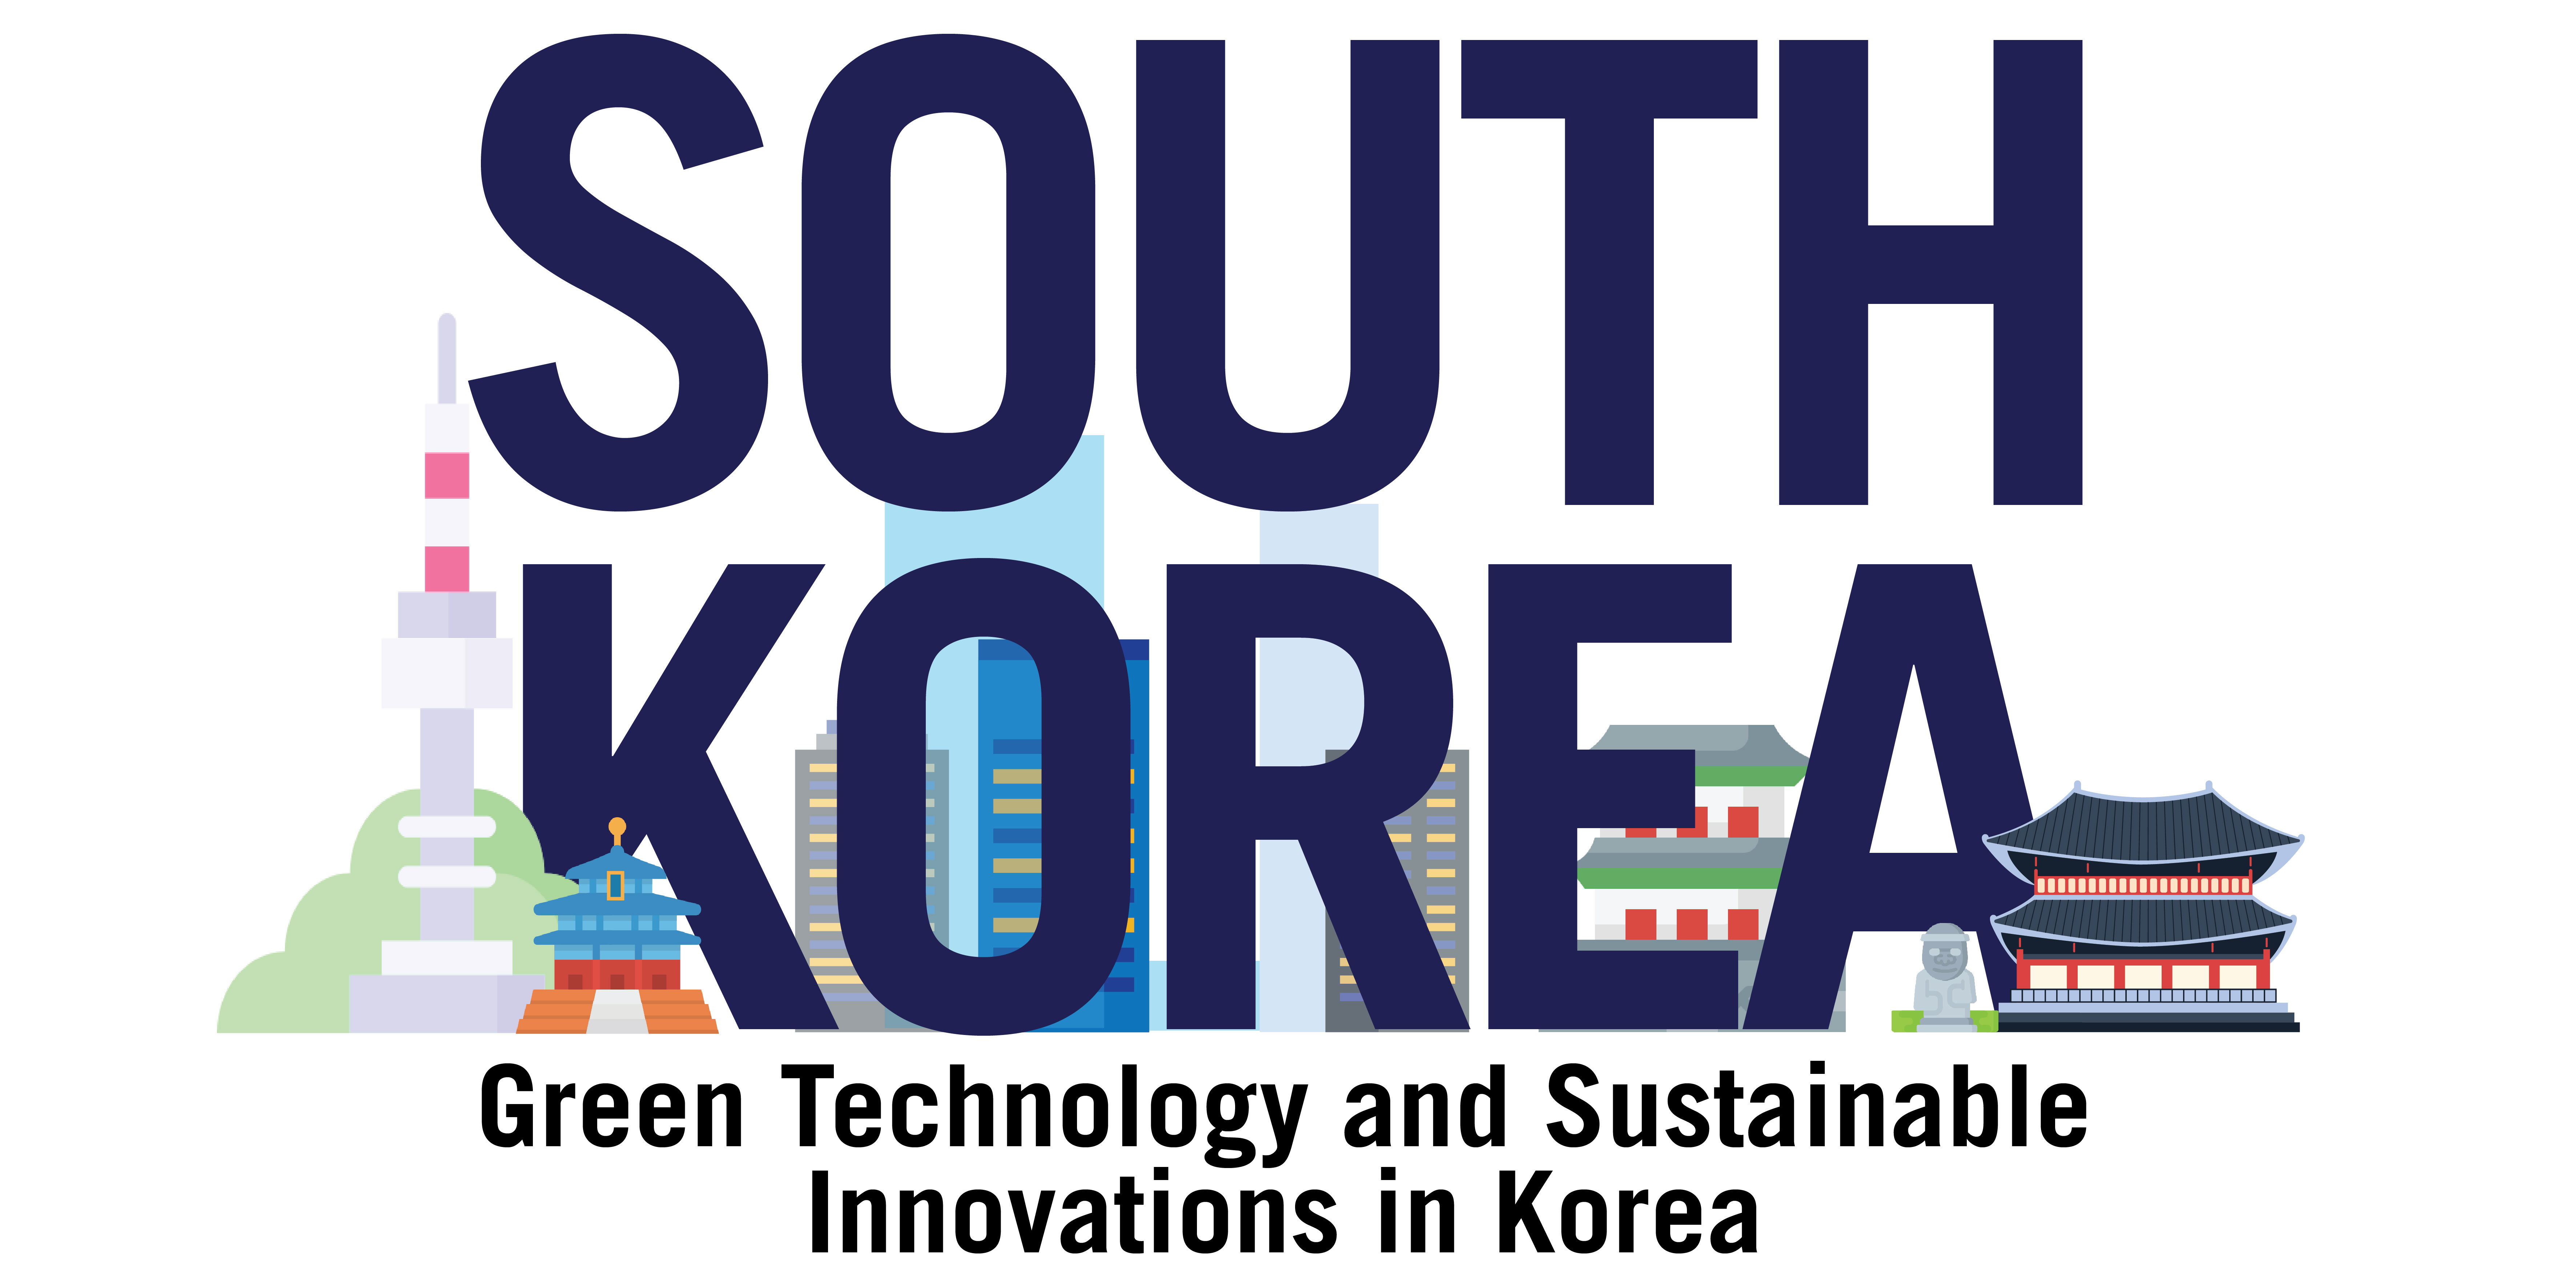 Green Technology and Sustainable Innovations in Korea